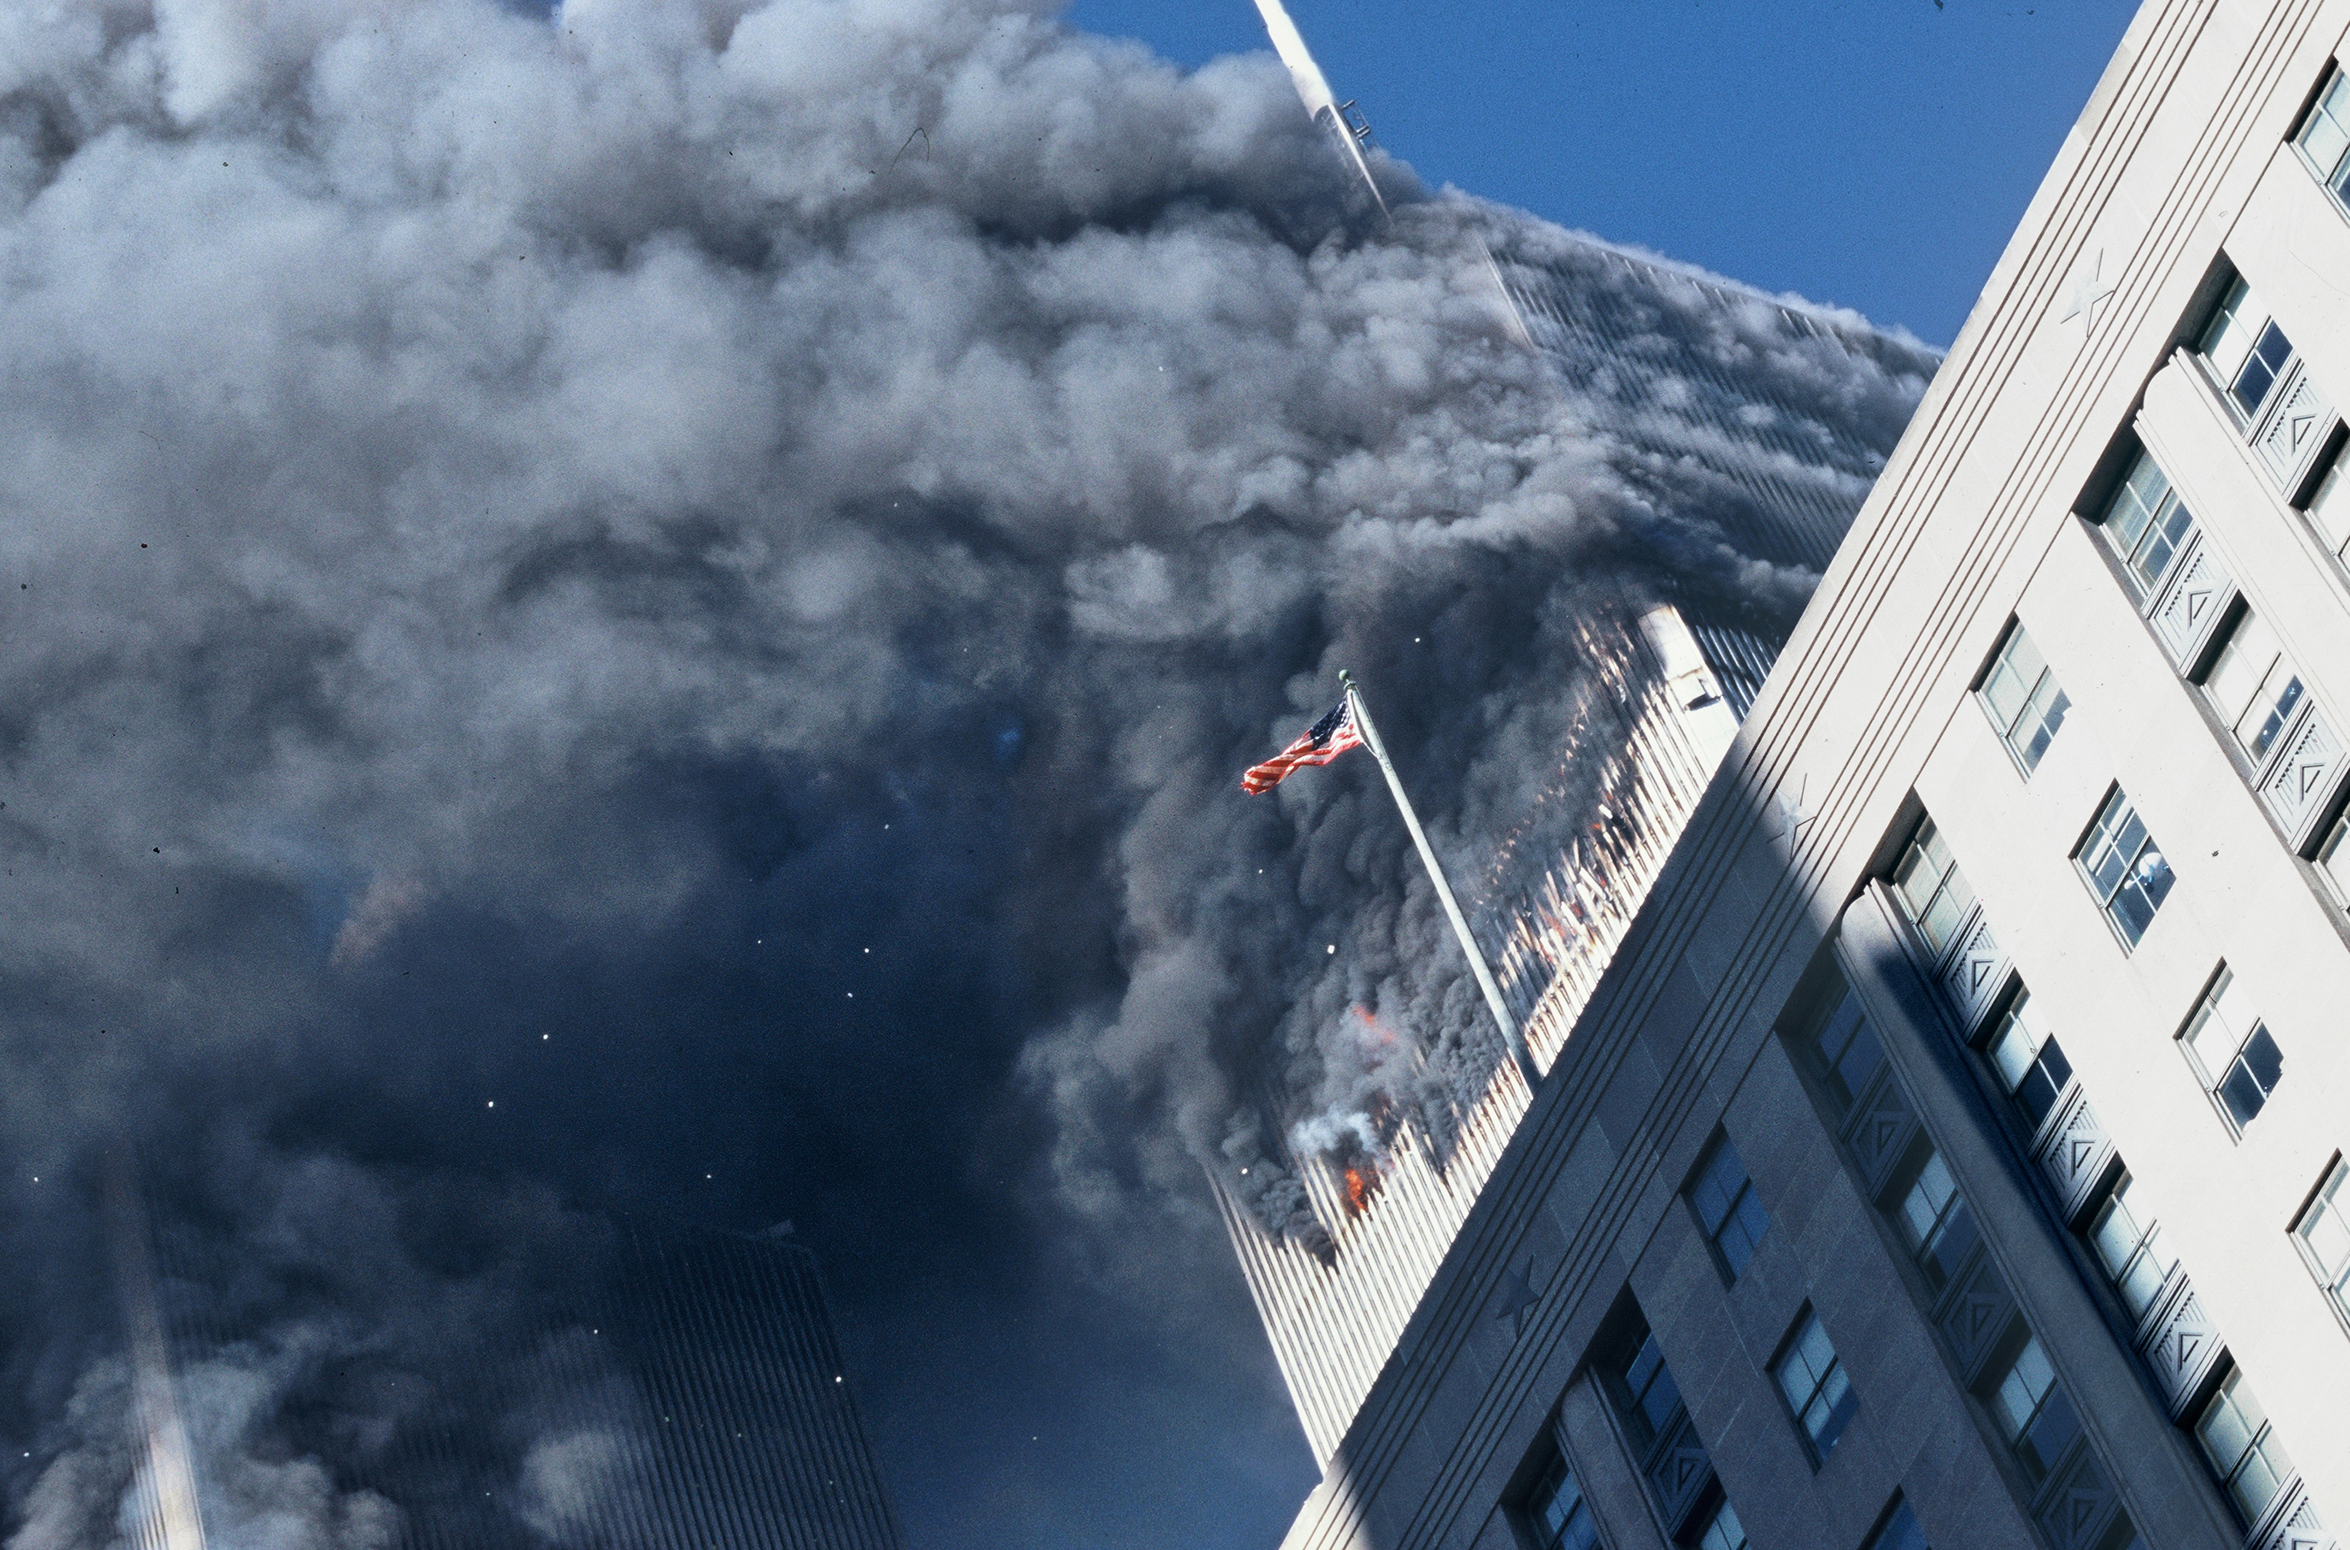 Smoke after a plane crashed into the South Tower of the World Trade Center, on Sept. 11, 2001.